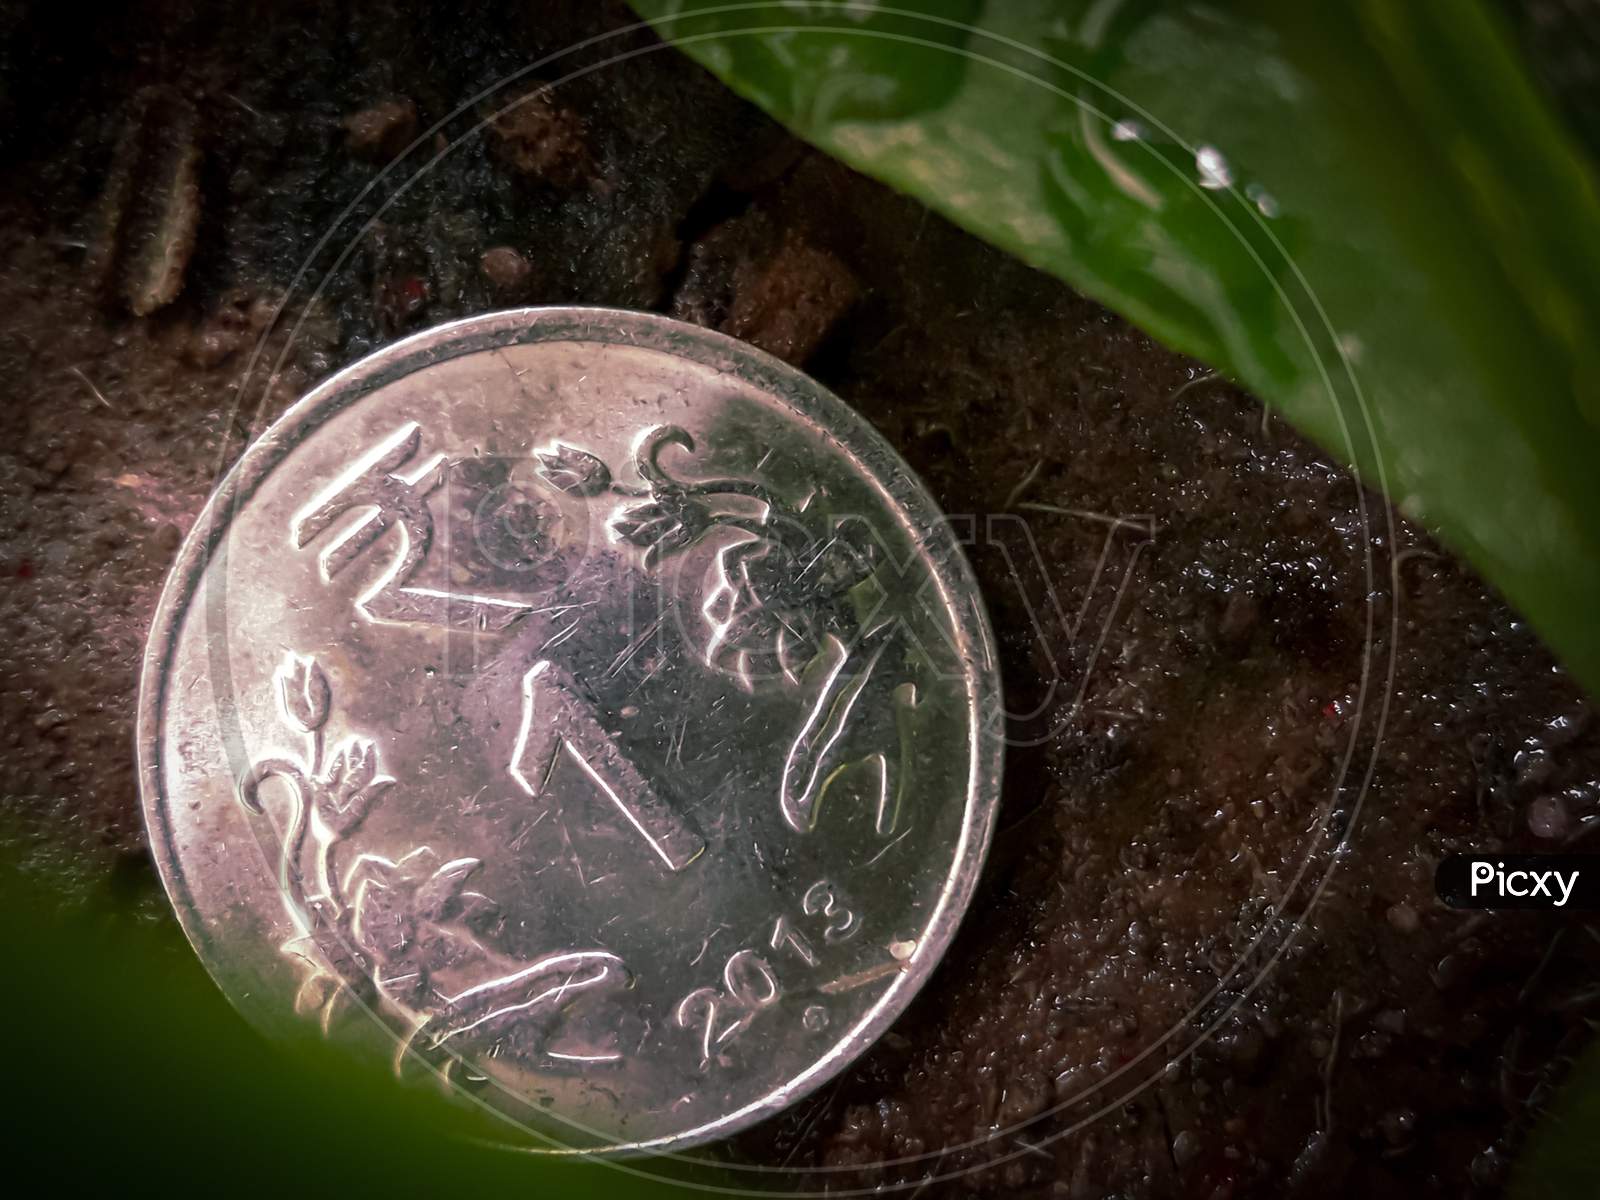 1 Rupee Coin On The Ground With Leaf